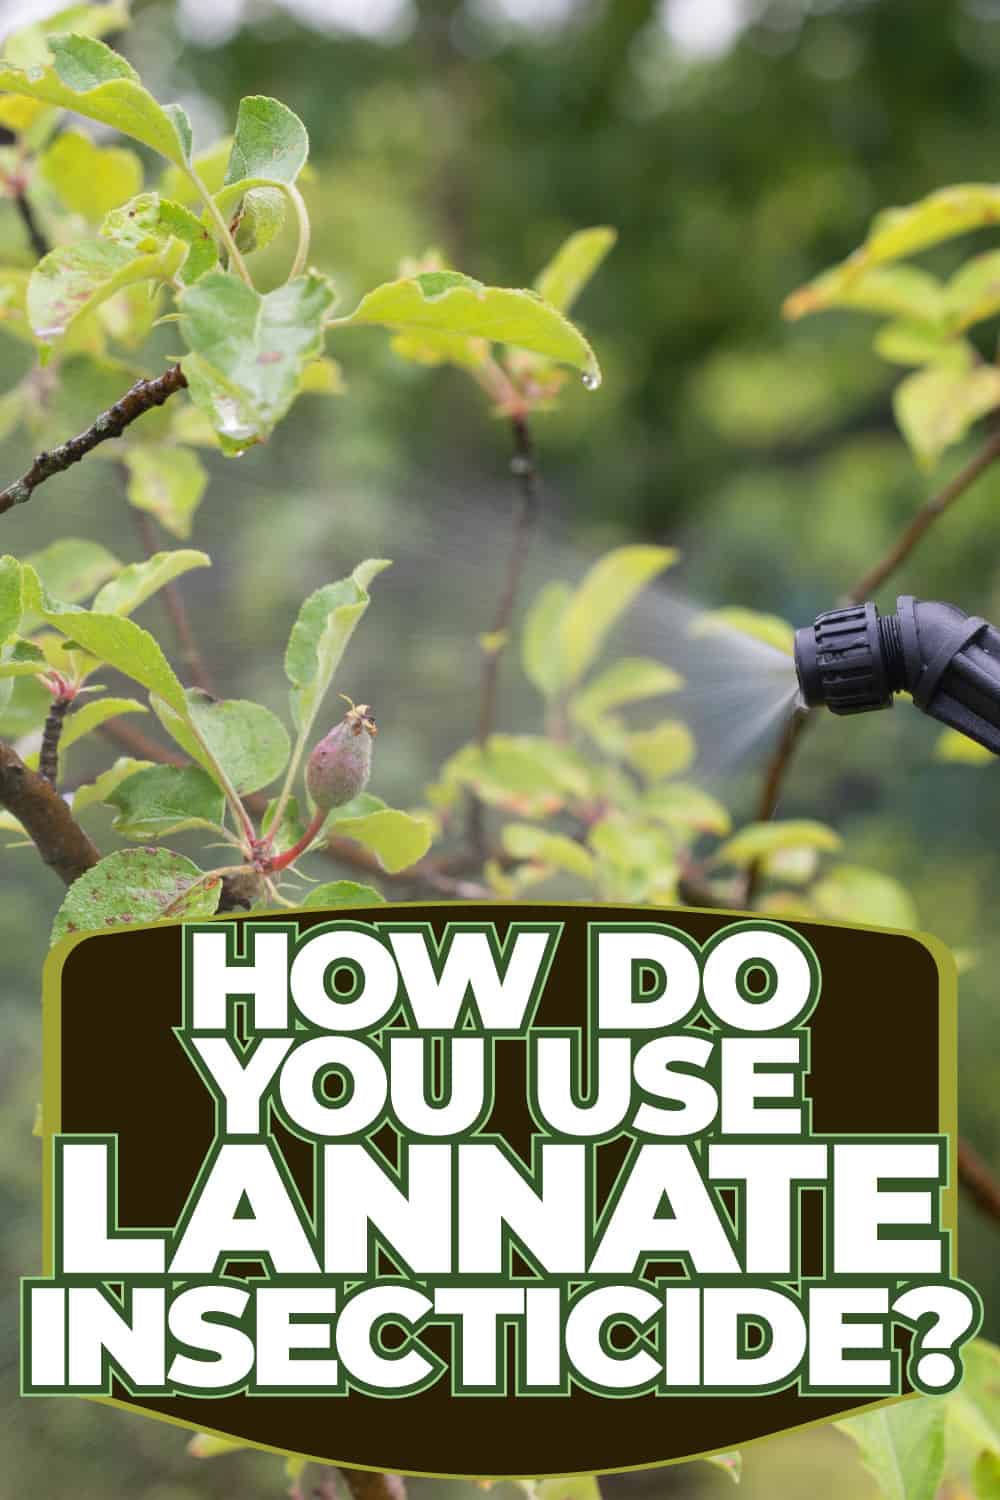 How Do You Use Lannate Insecticide?